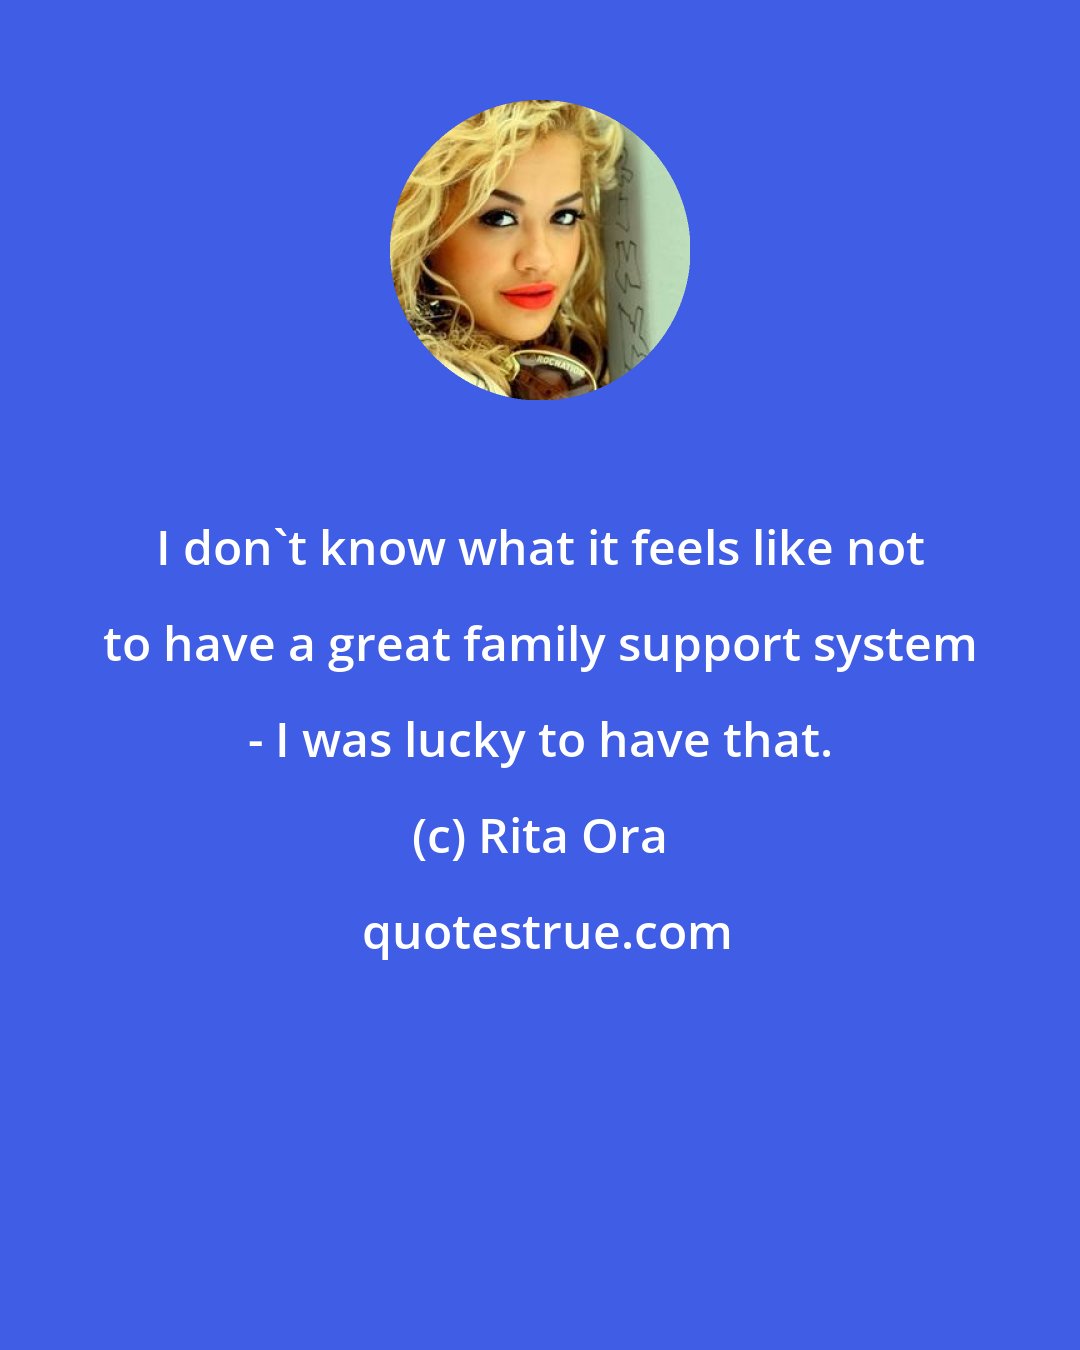 Rita Ora: I don't know what it feels like not to have a great family support system - I was lucky to have that.